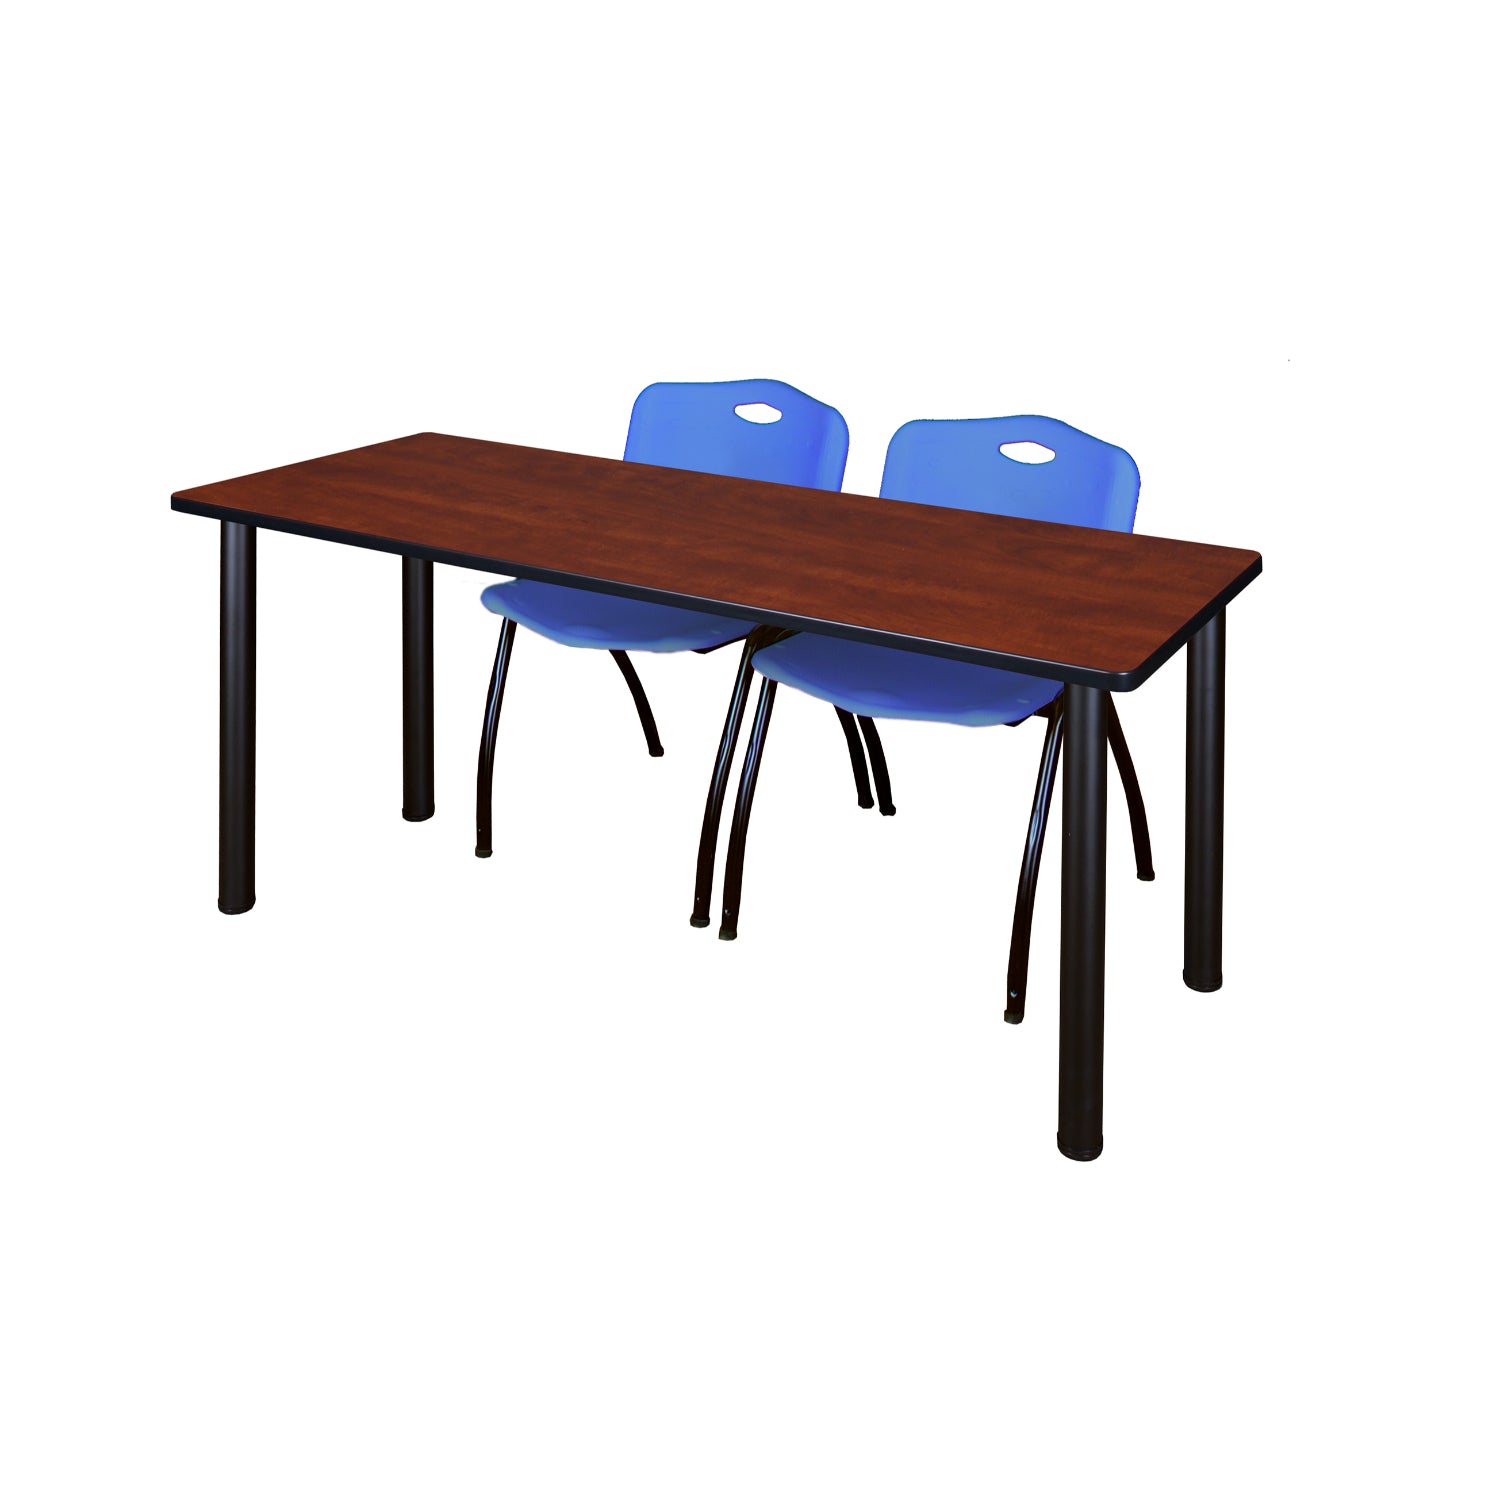 Kee Training Table and Chair Package, Kee 60" x 24" Post Leg Training/Seminar Table with 2 "M" Stack Chairs